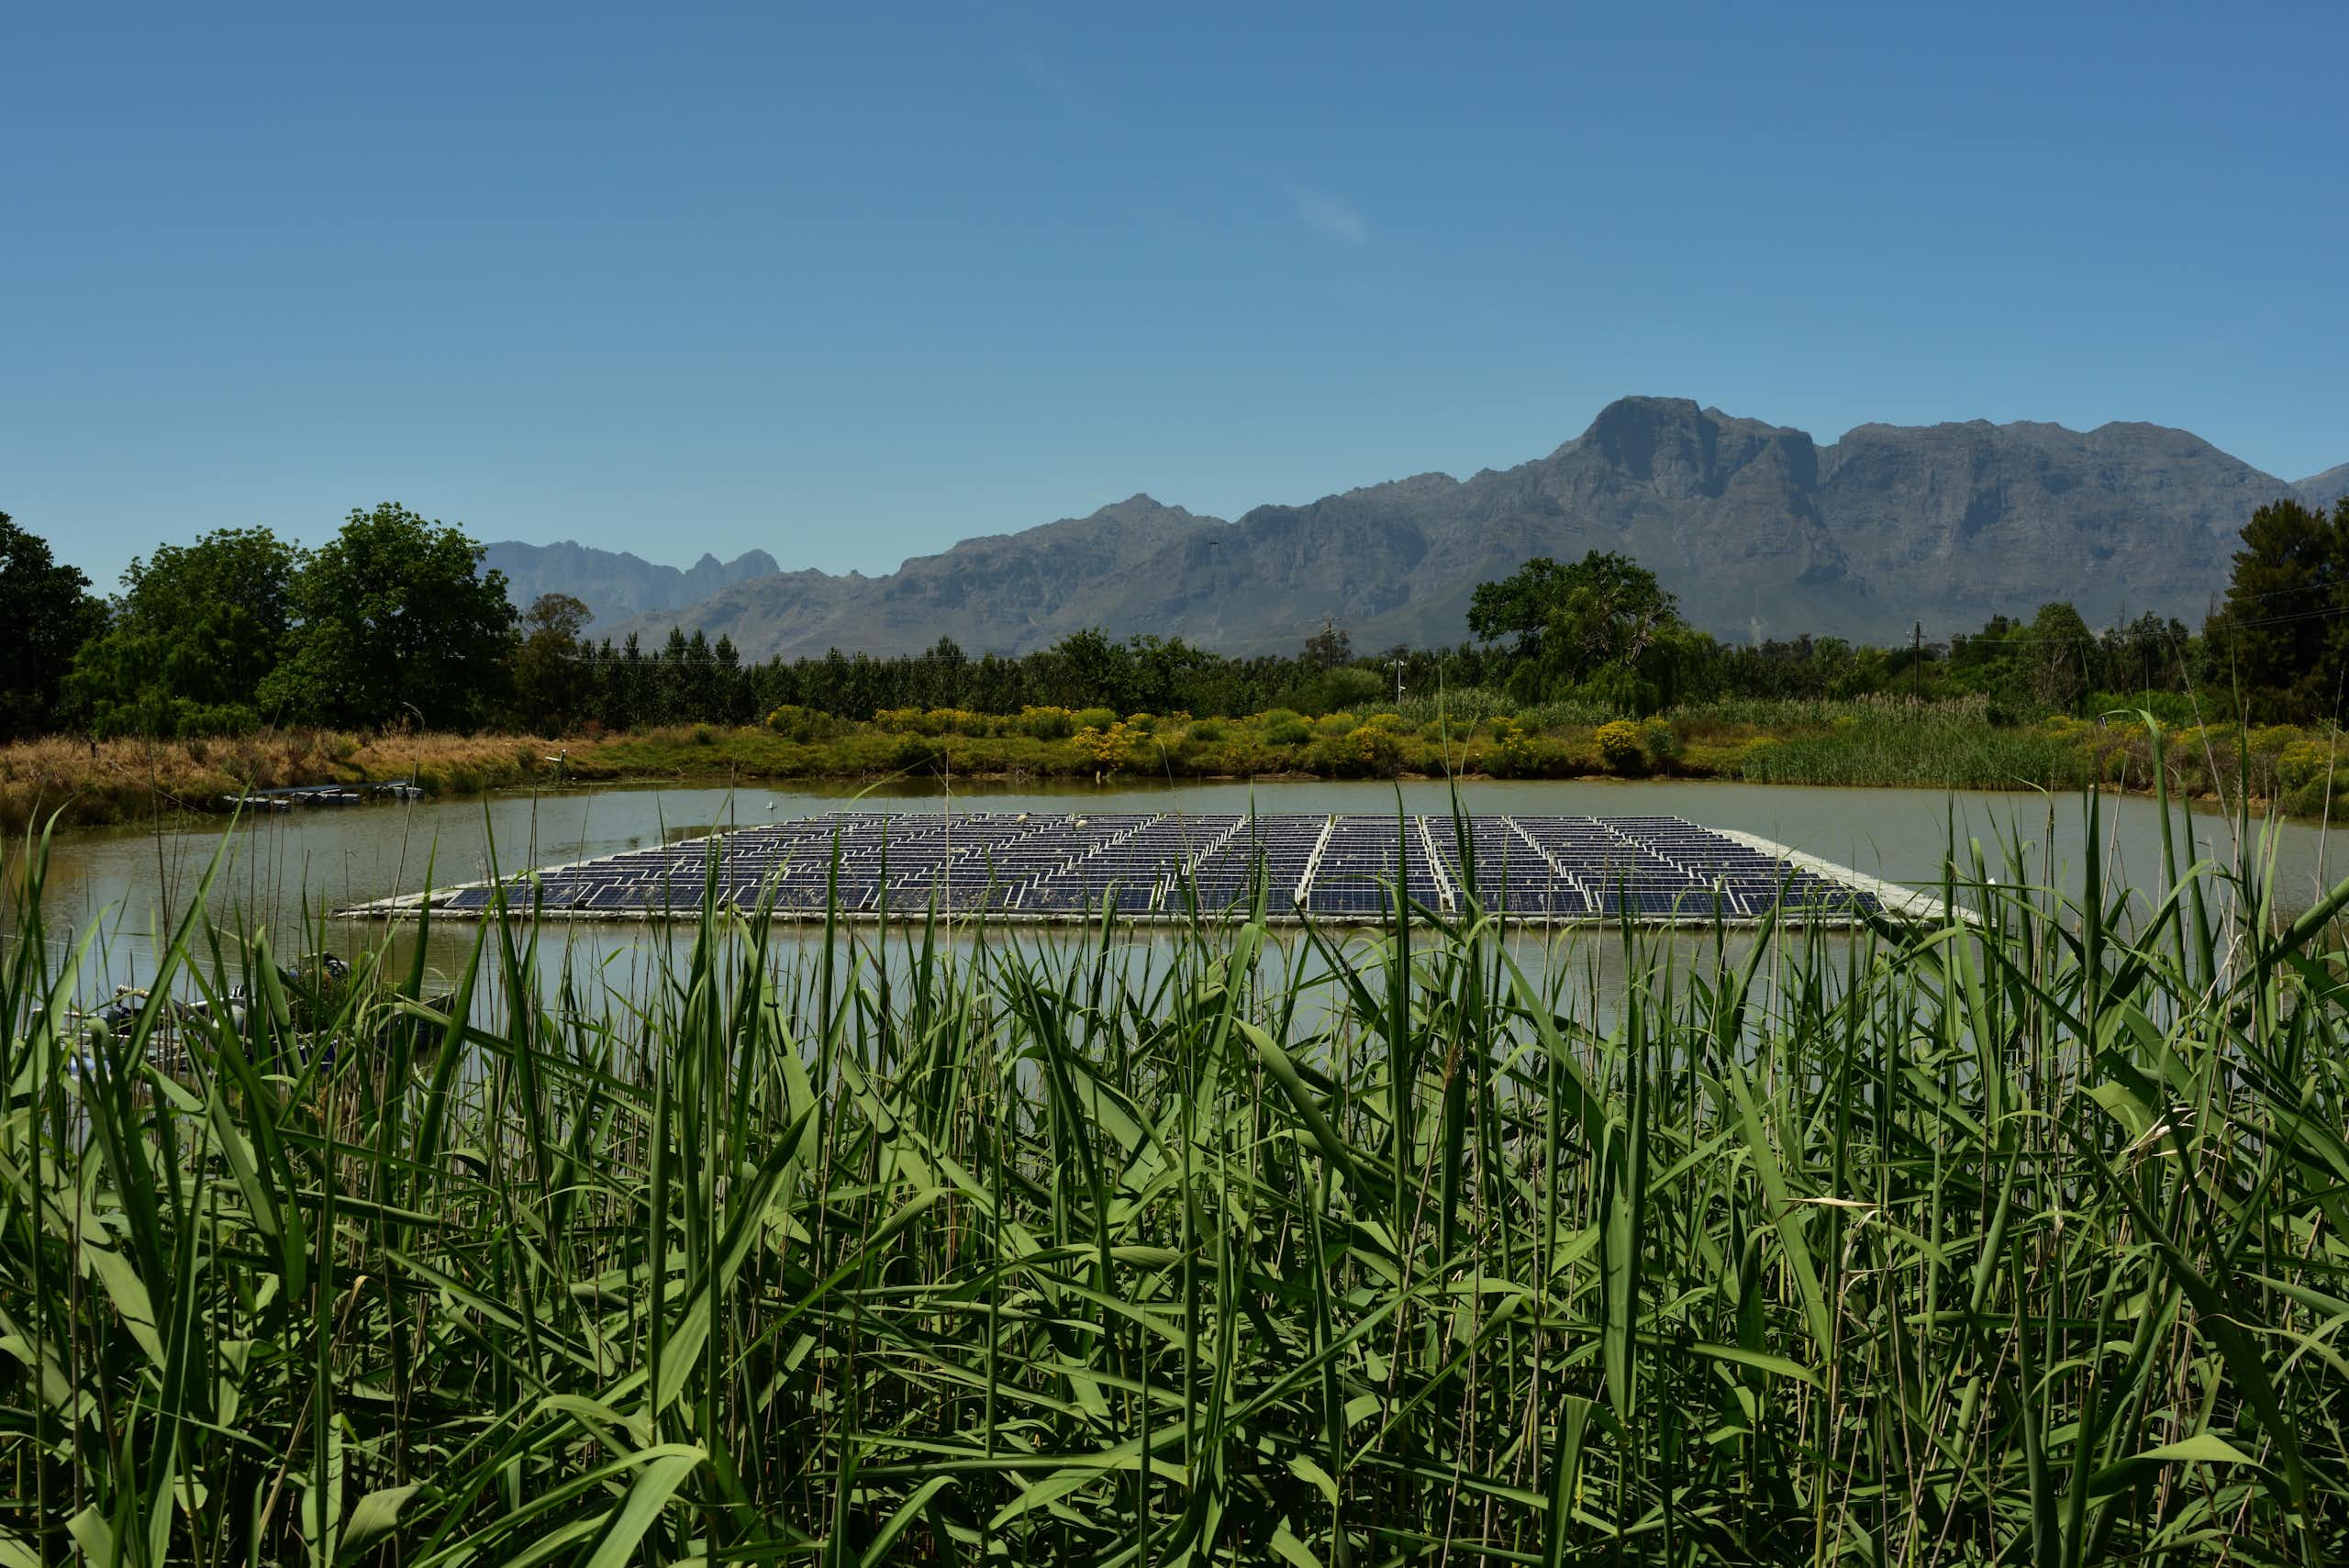 Landscape showing a large solar panel on the surface of a rural dam